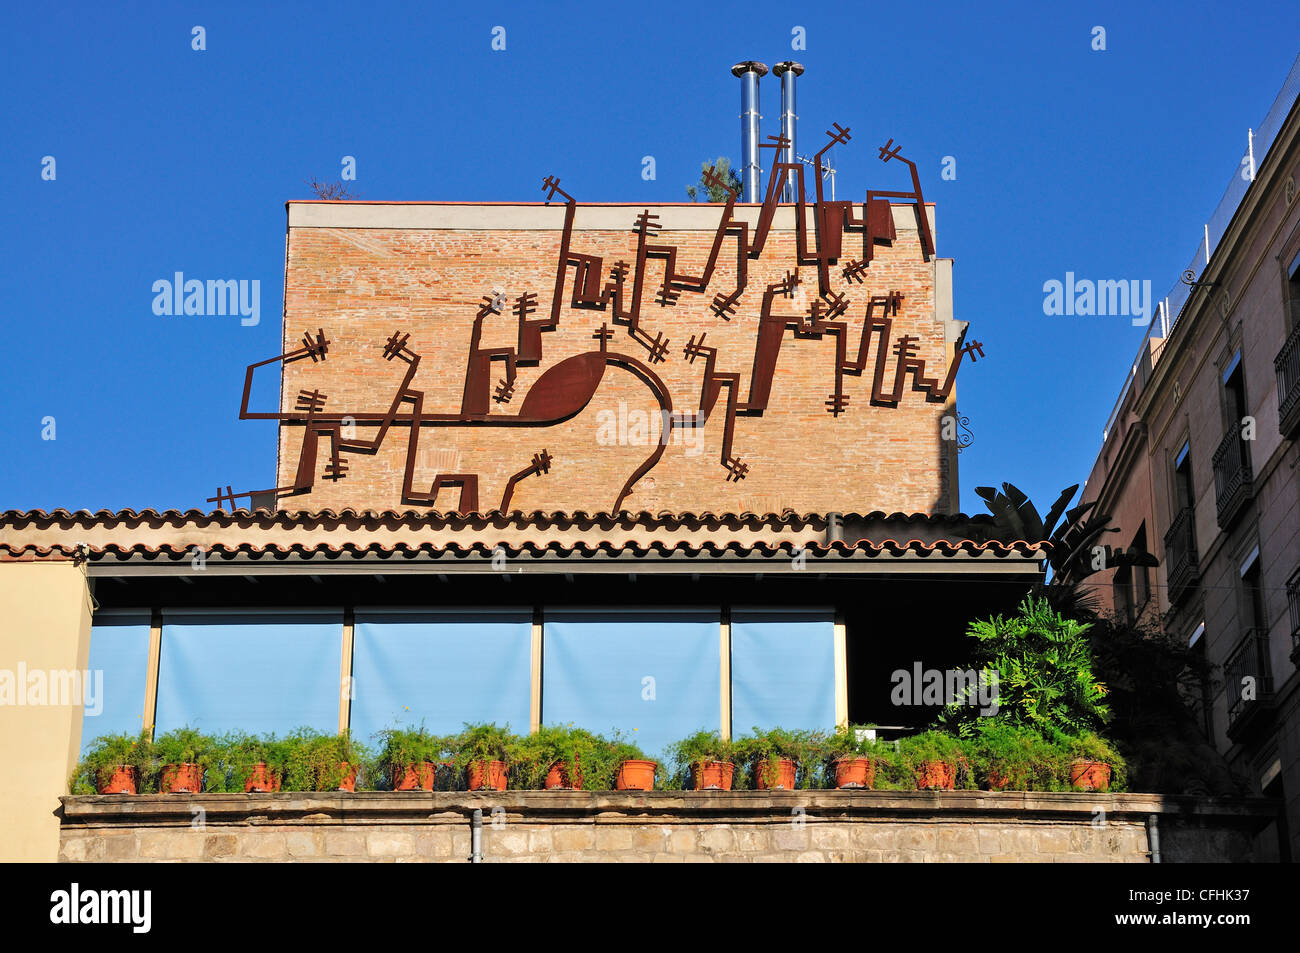 Barcelona, Spain. Metal artwork on roof of building in Calle de Elisabets in the Raval district Stock Photo